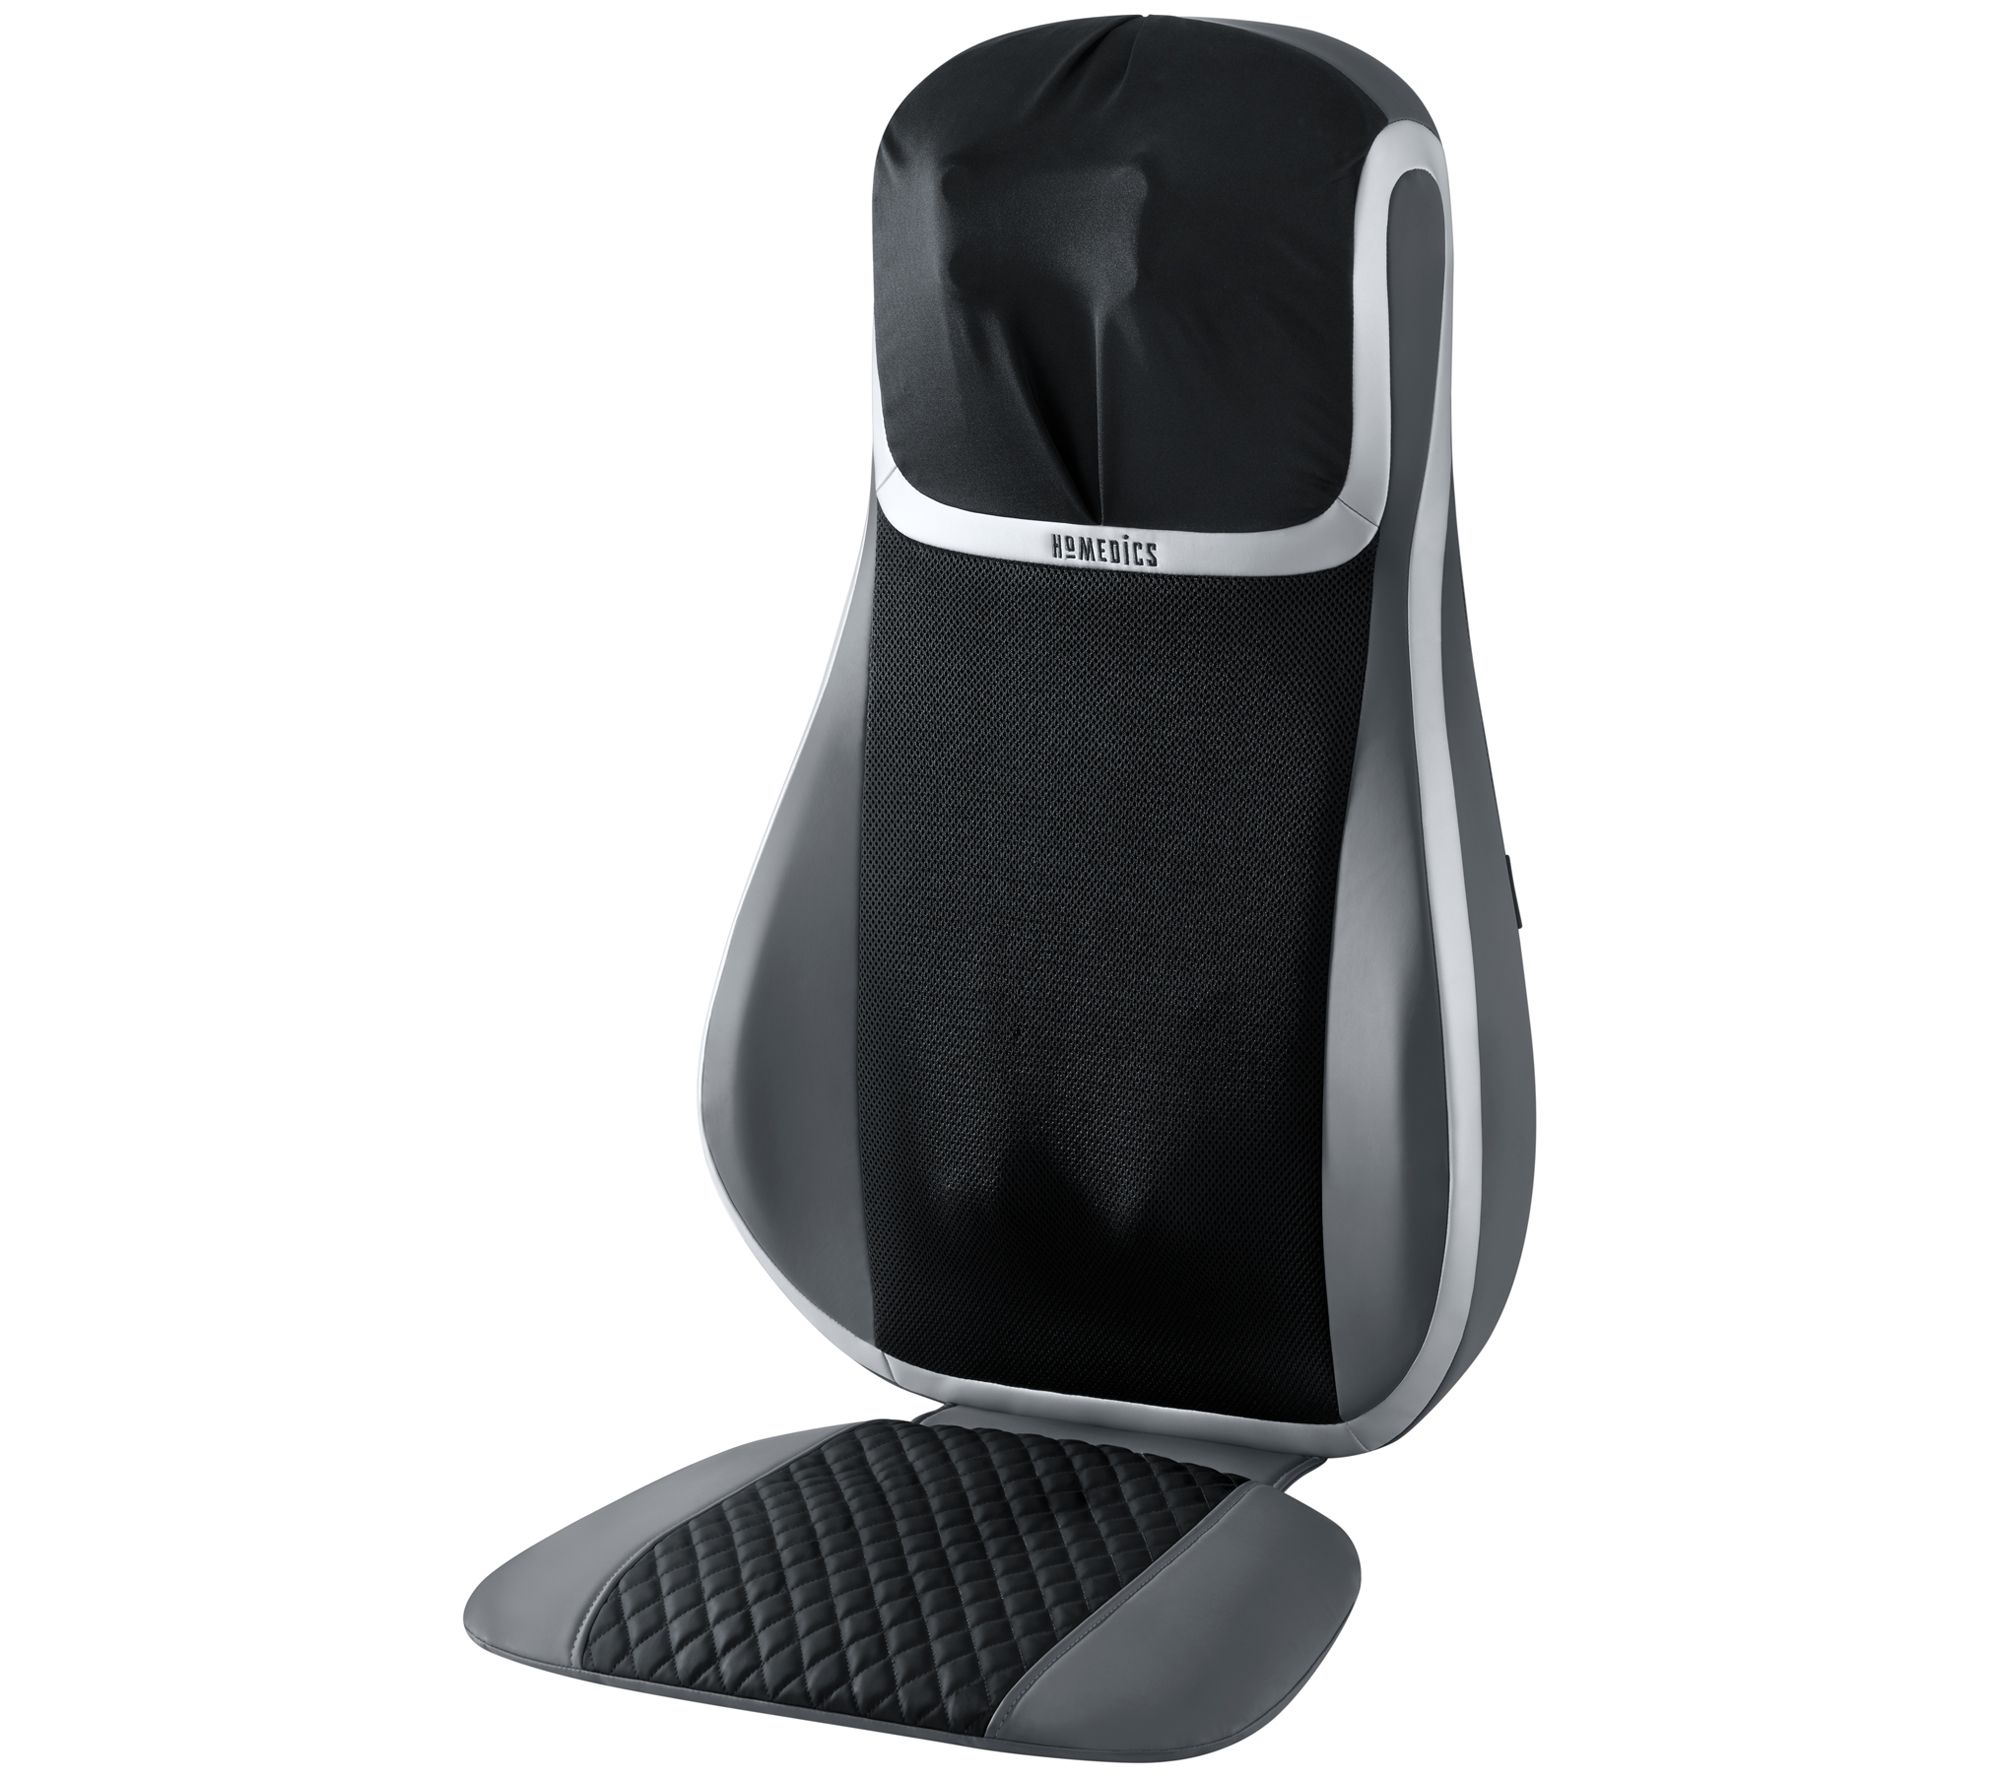 Lumbar Support for Chair with Heat - Homedics